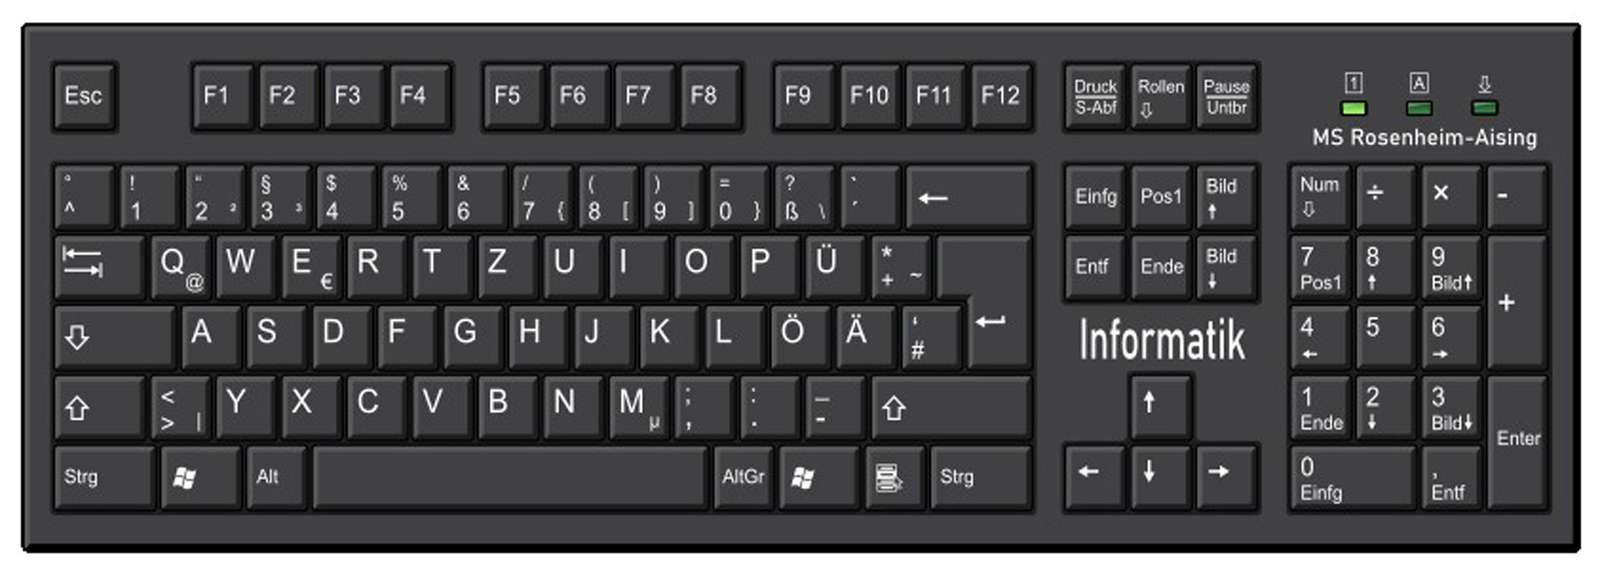 Keyboard - MS Aising online puzzle